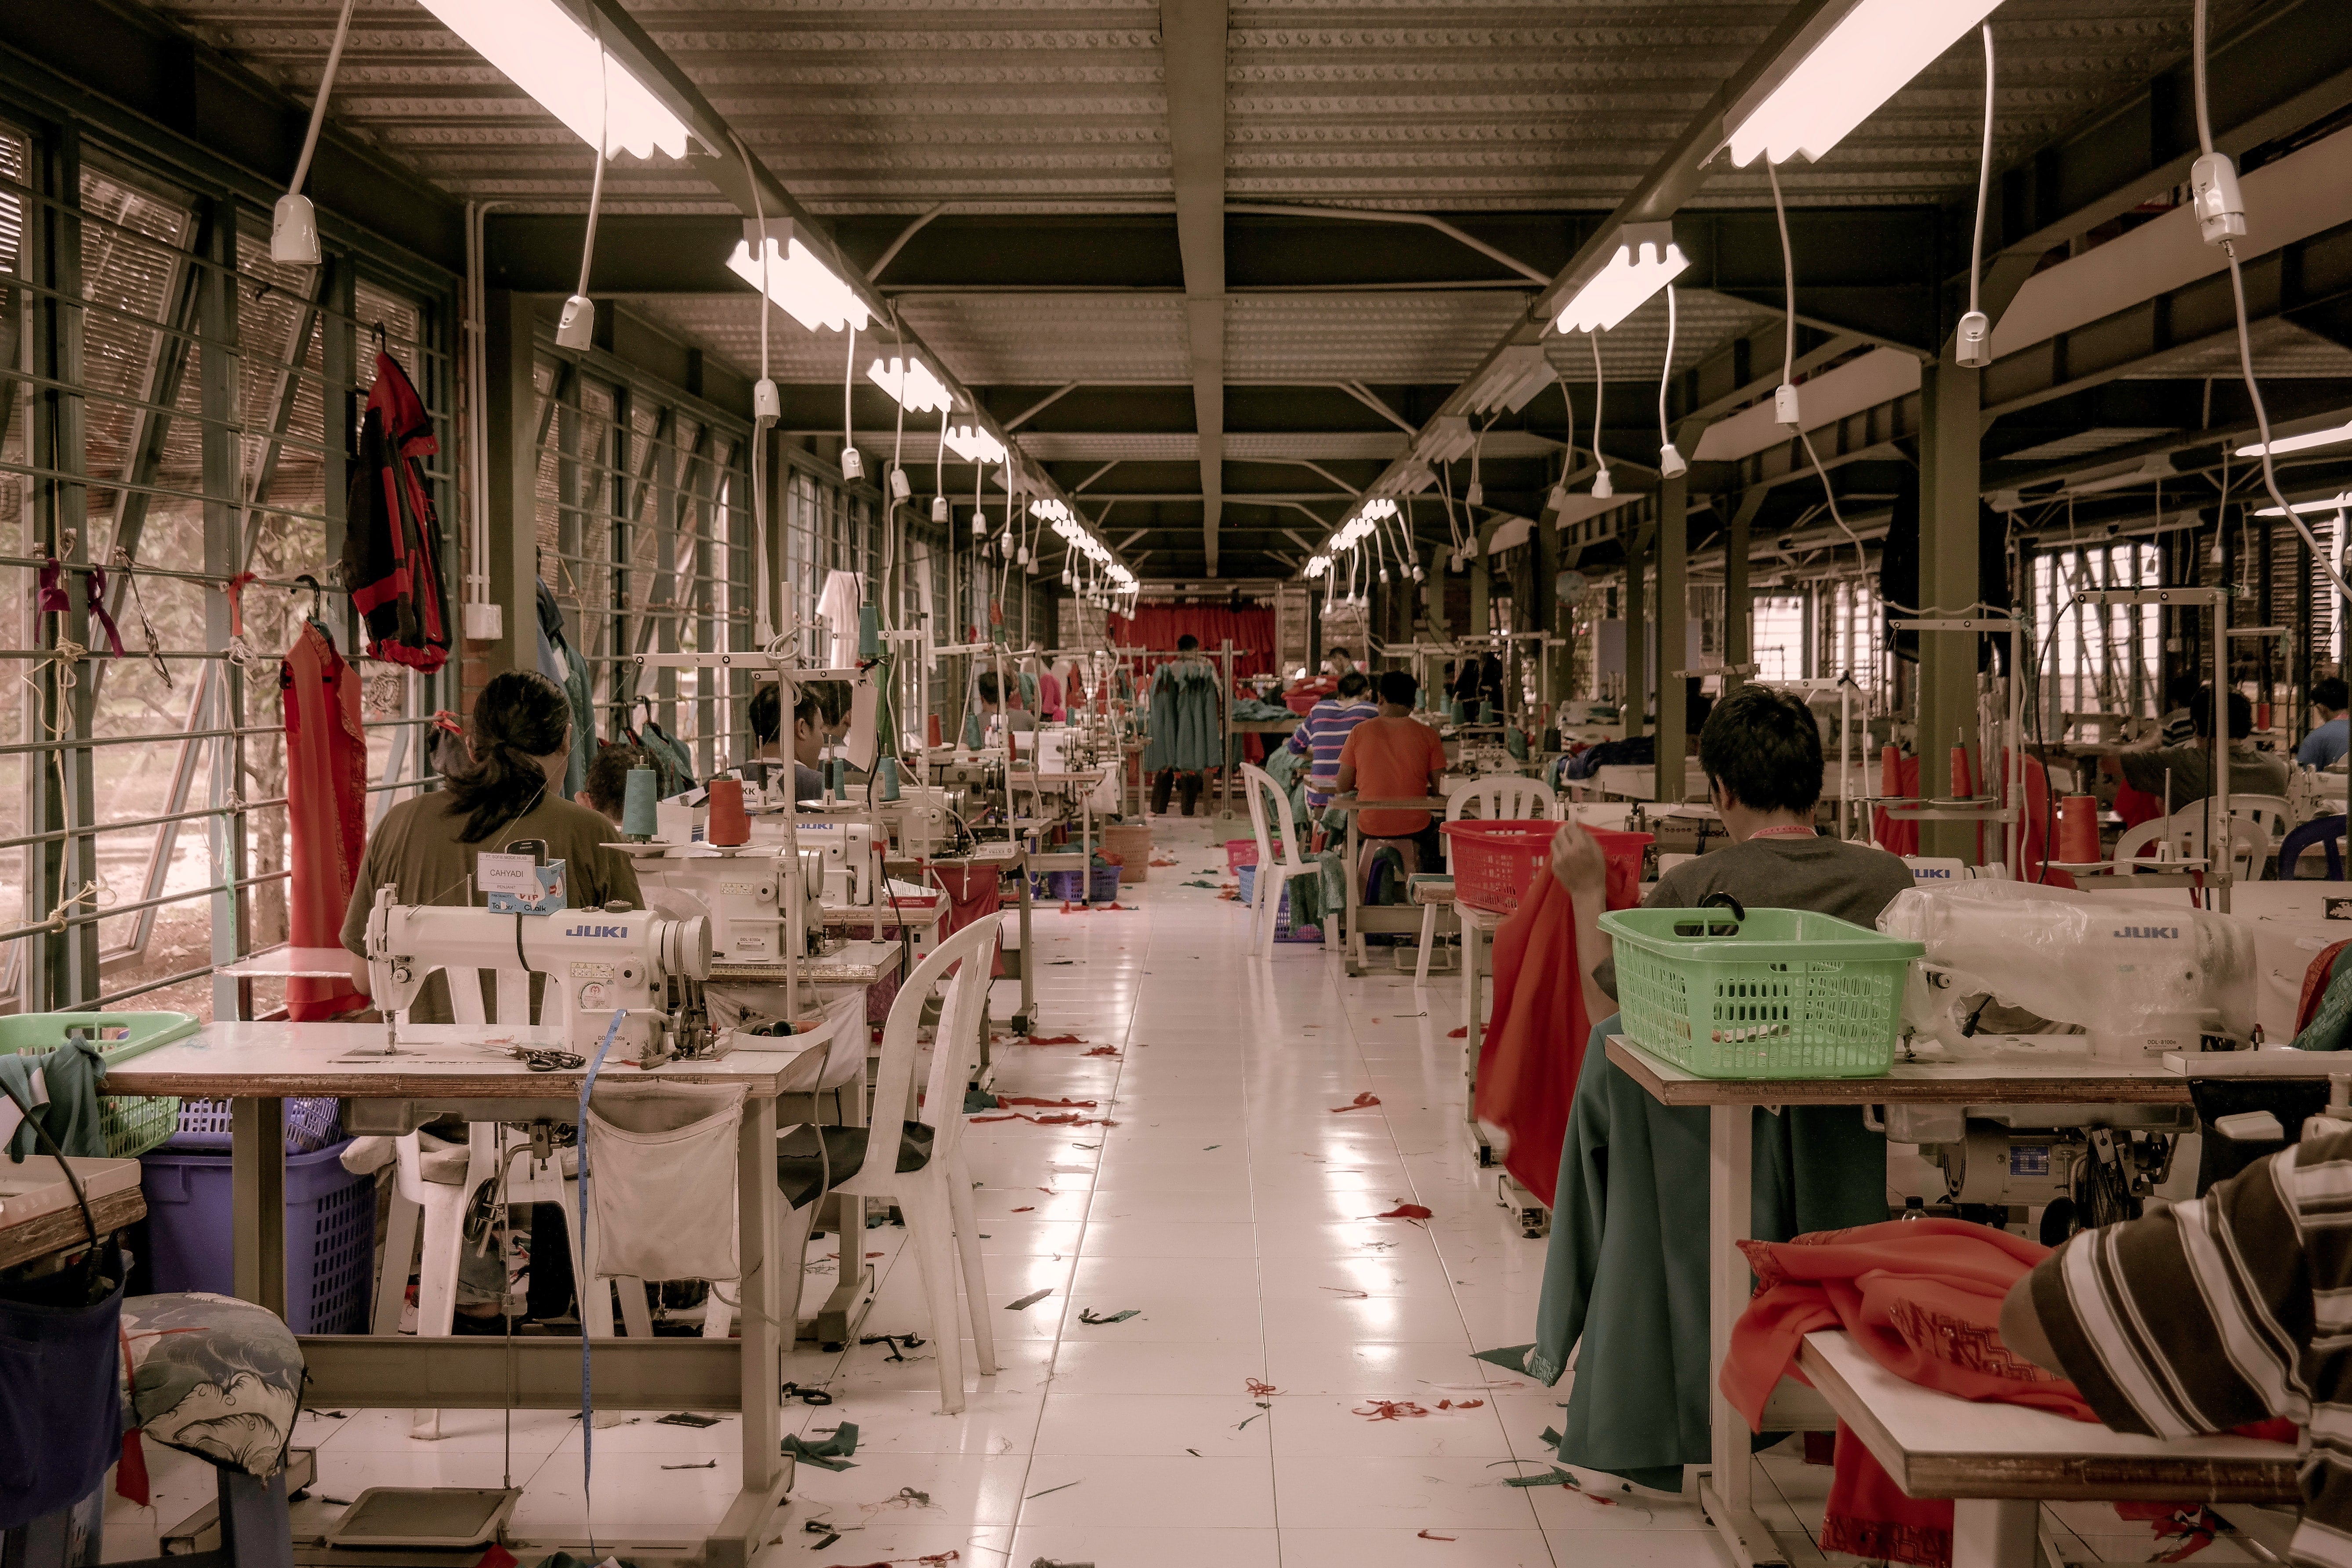 the interior of a garment manufacturing facility with rows of sewing machines